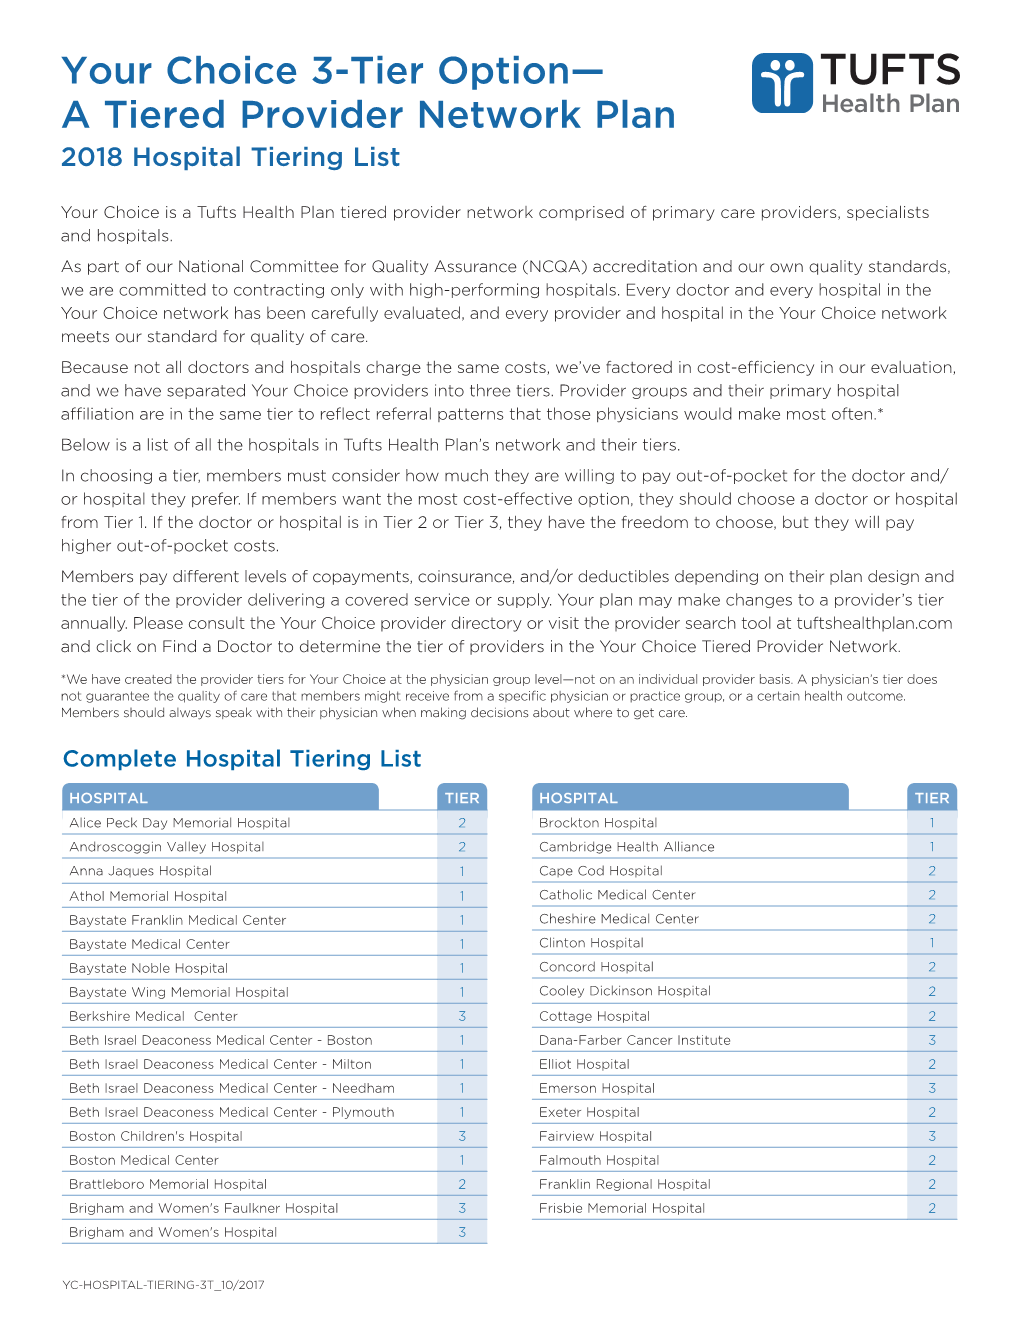 Your Choice 3-Tier Option— a Tiered Provider Network Plan 2018 Hospital Tiering List